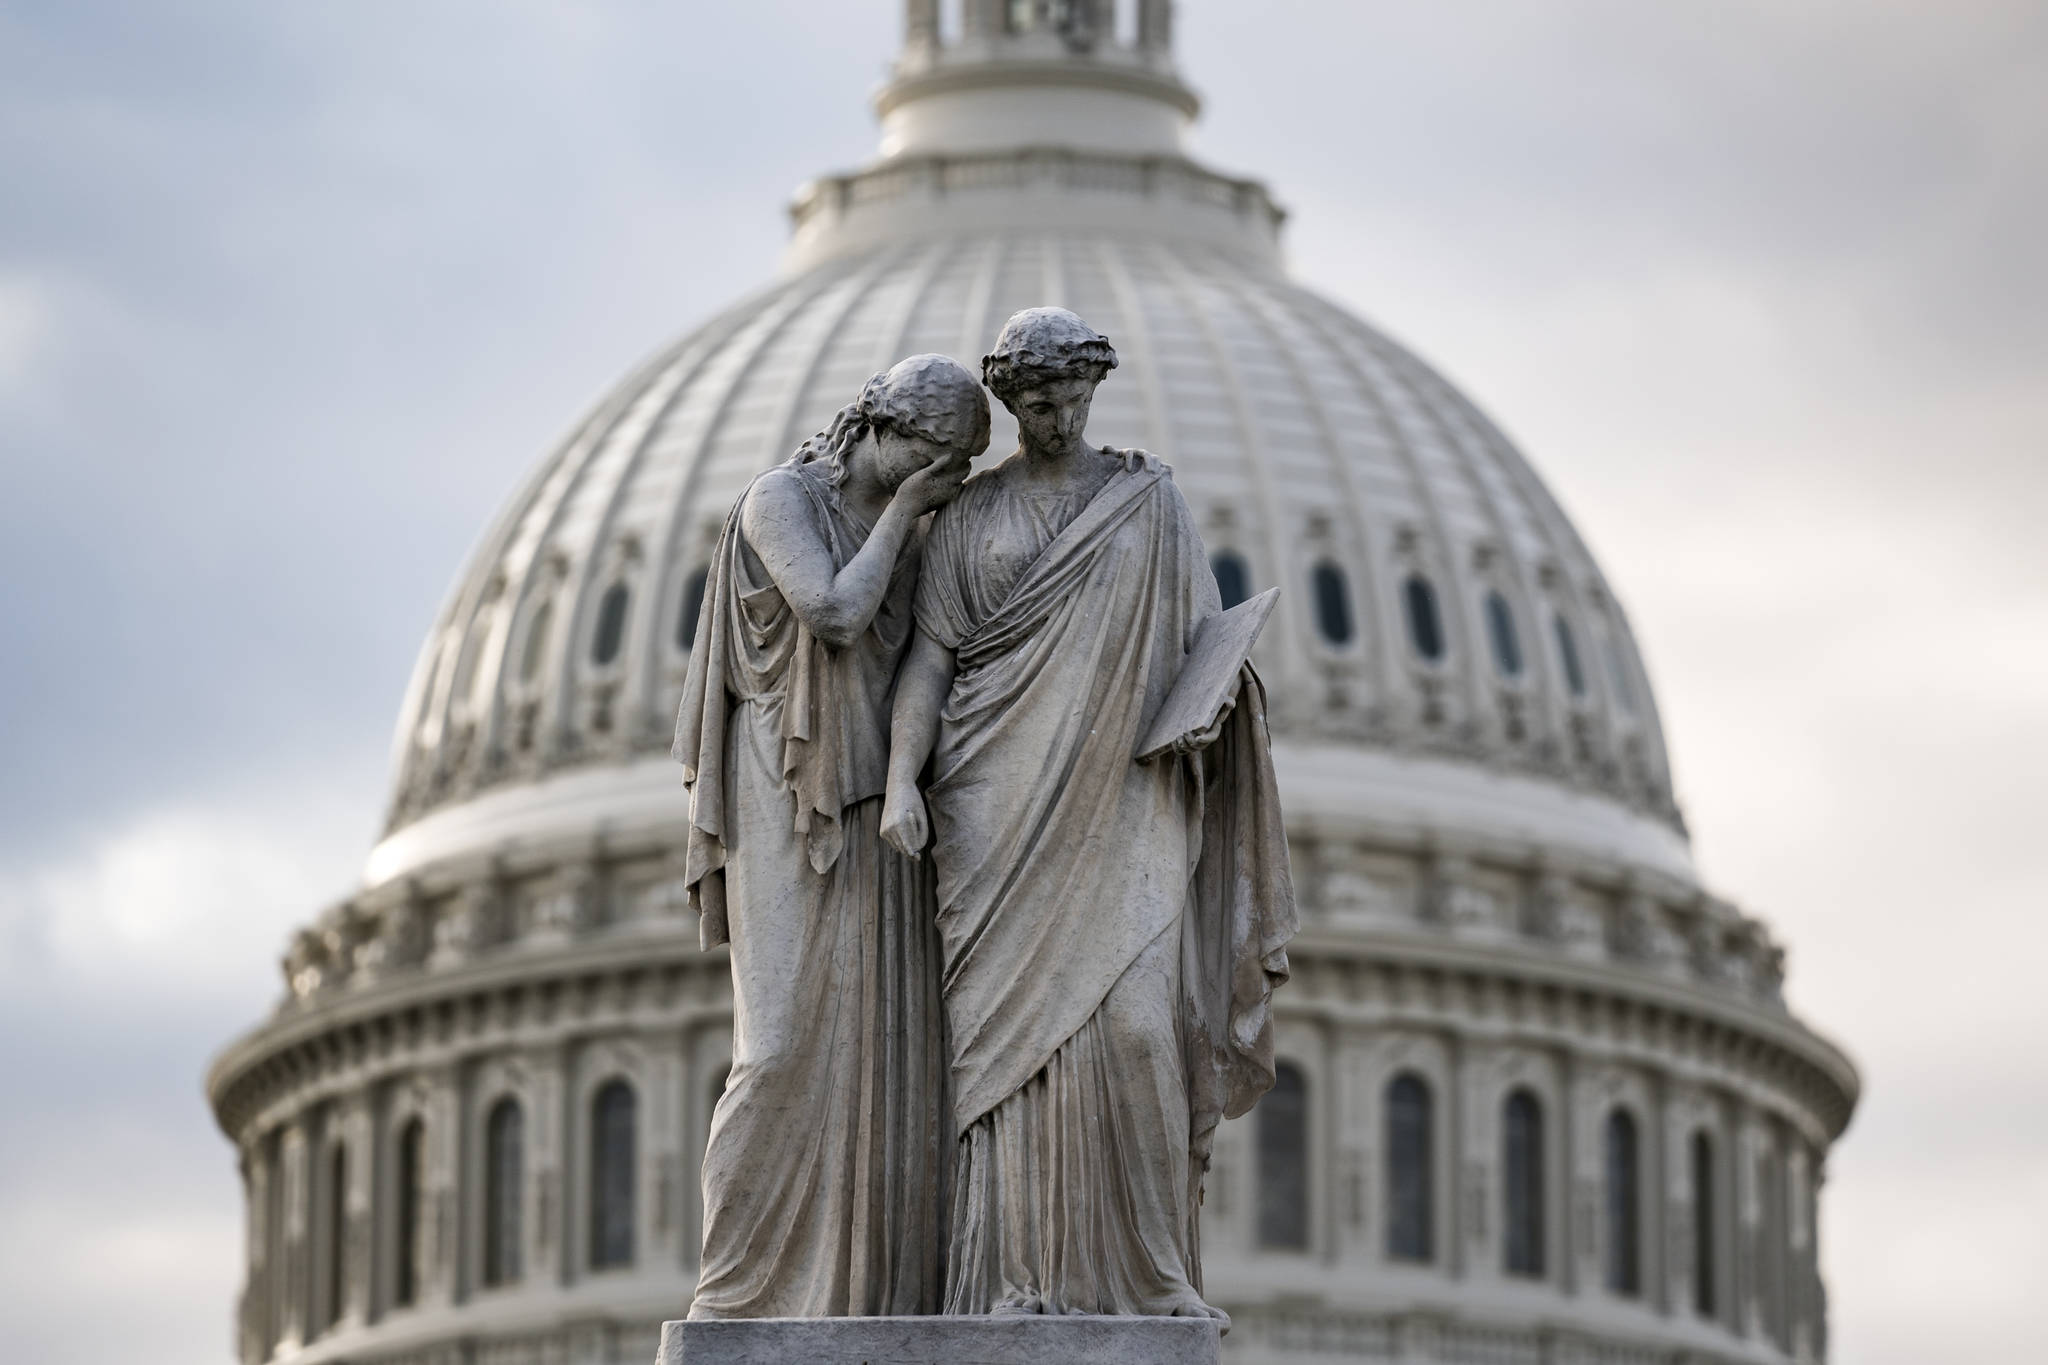 The Capitol Dome looms behind the Peace Monument statue in Washington, Friday, May 28, 2021, as the Senate tries to finish to its work going into the Memorial Day recess with Republican leaders insisting they will block a commission on the Jan. 6 insurrection by a mob loyal to former President Donald Trump. (AP Photo / J. Scott Applewhite)